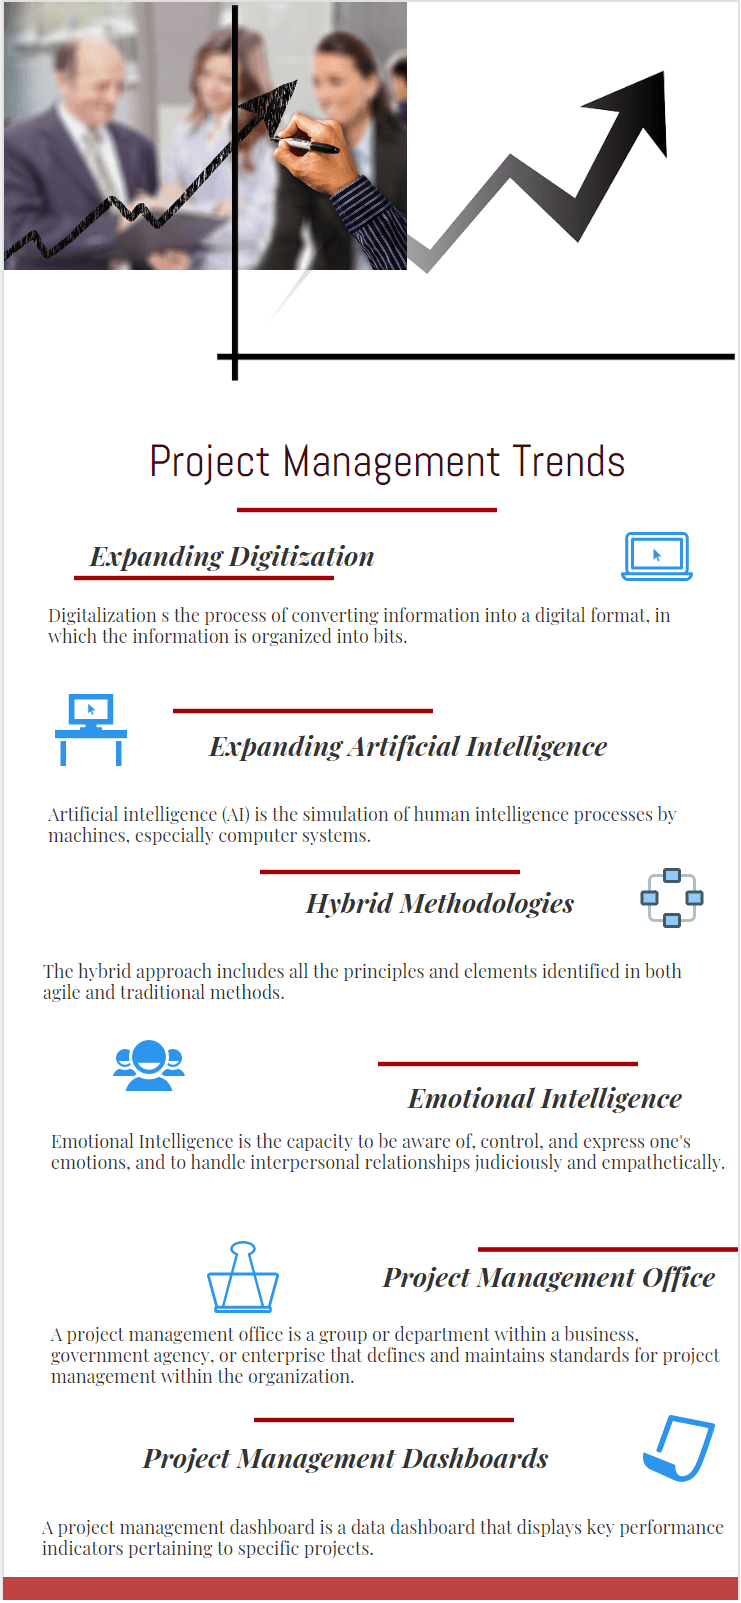 Project Management Trends & Future of Project Management infographic